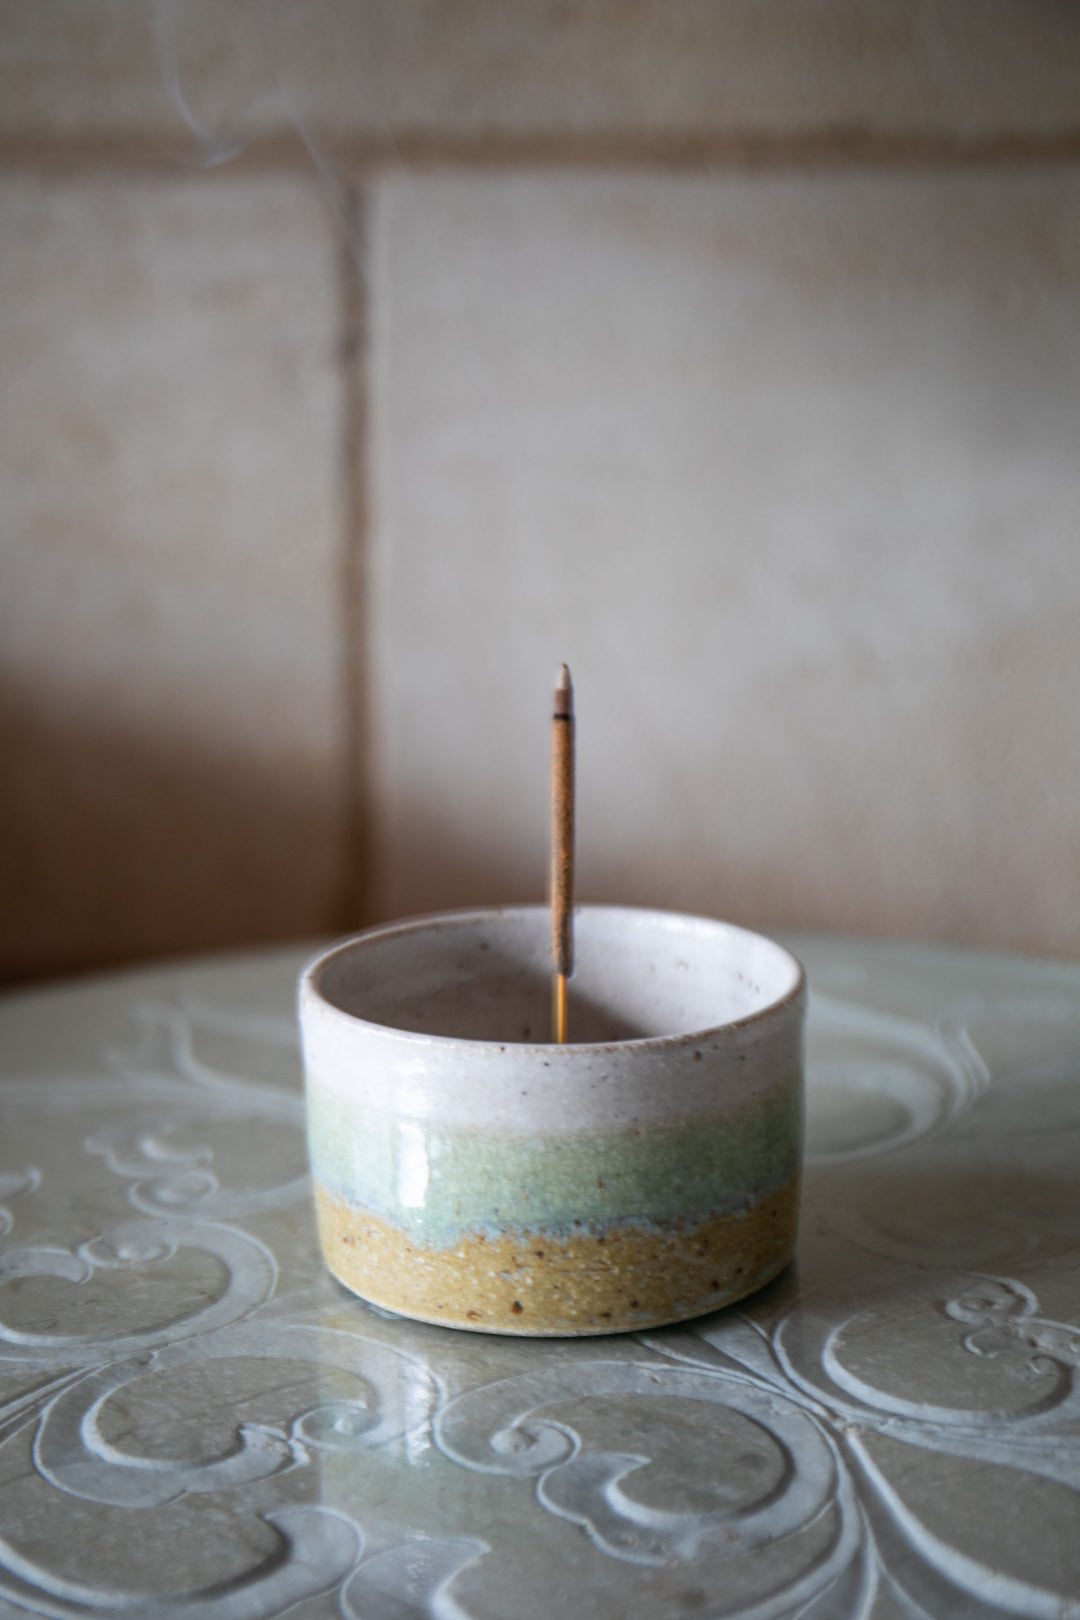 Ombre Cup Style Incense Holder - Green, White & Yellow